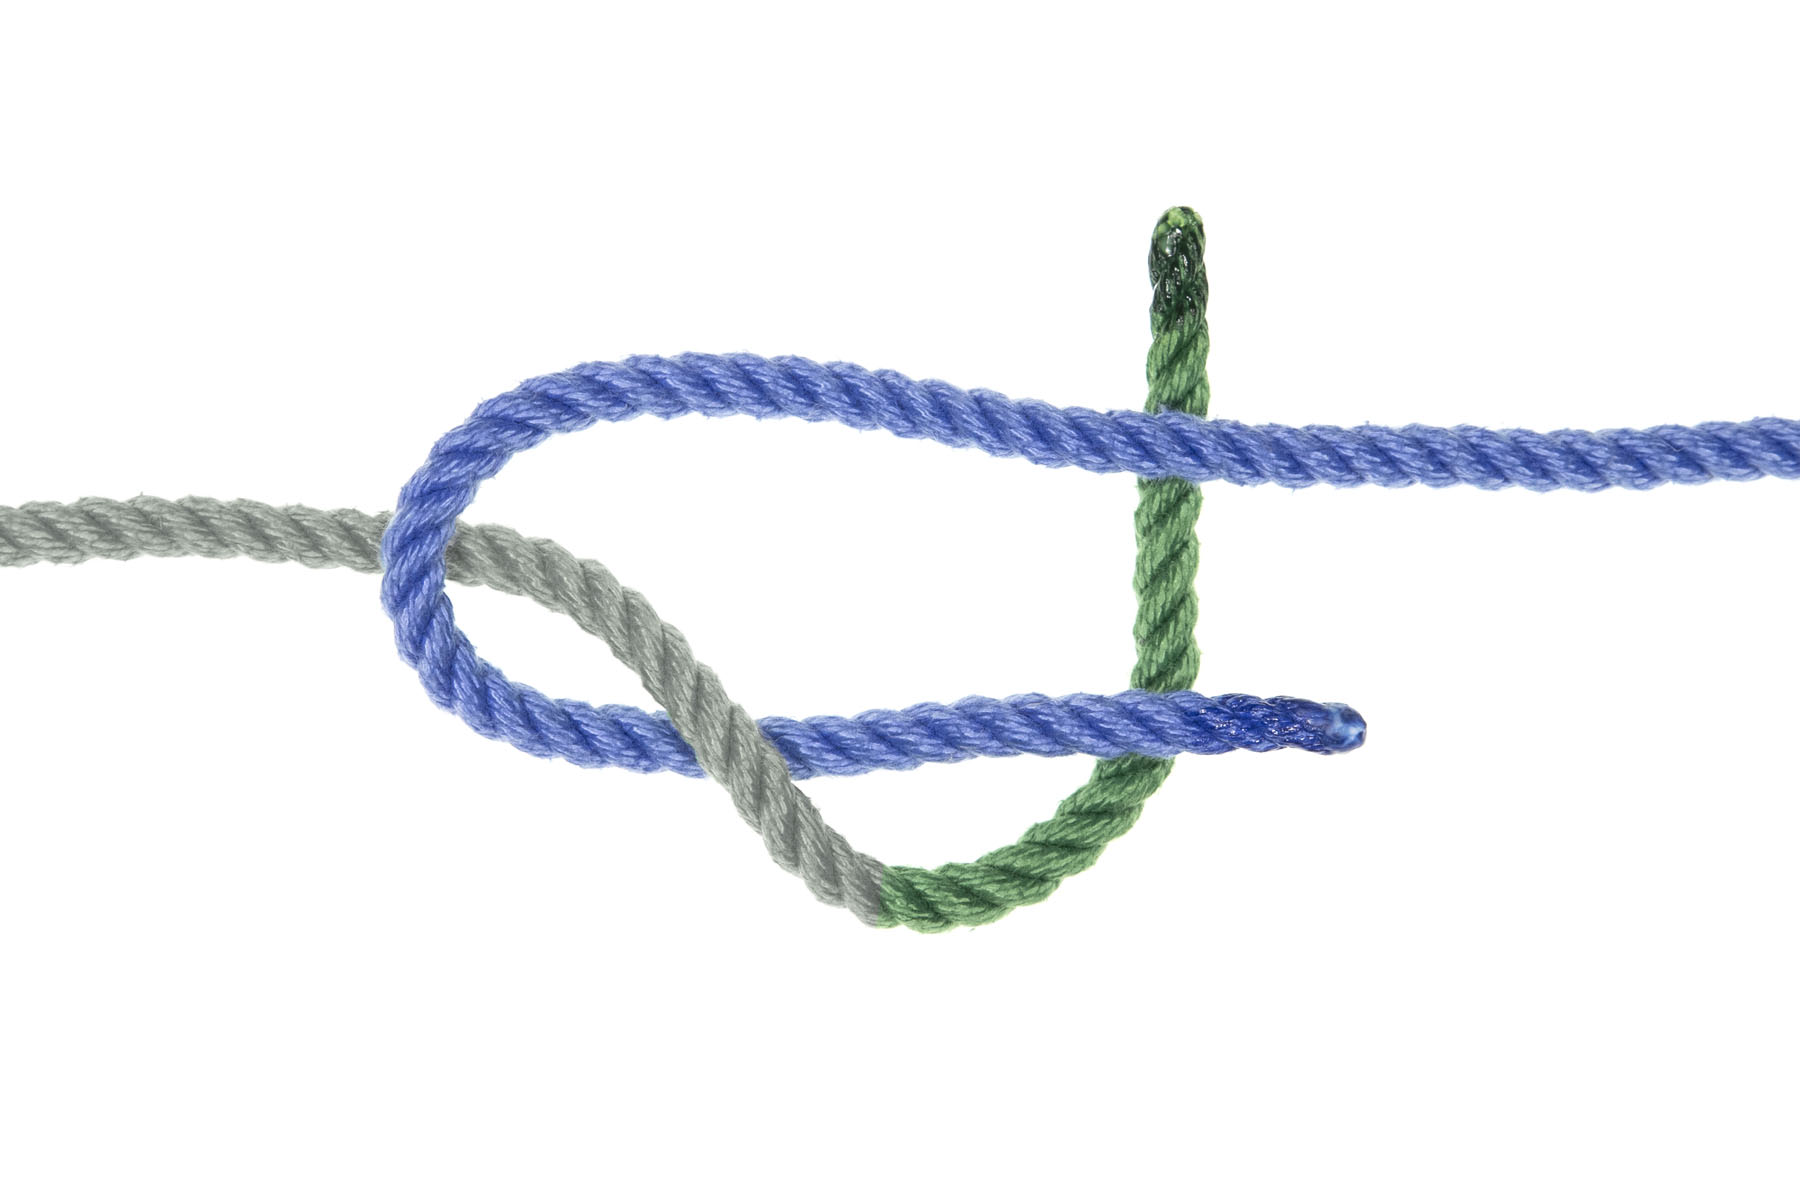 The green rope now turns up, passing under both parts of the blue rope.